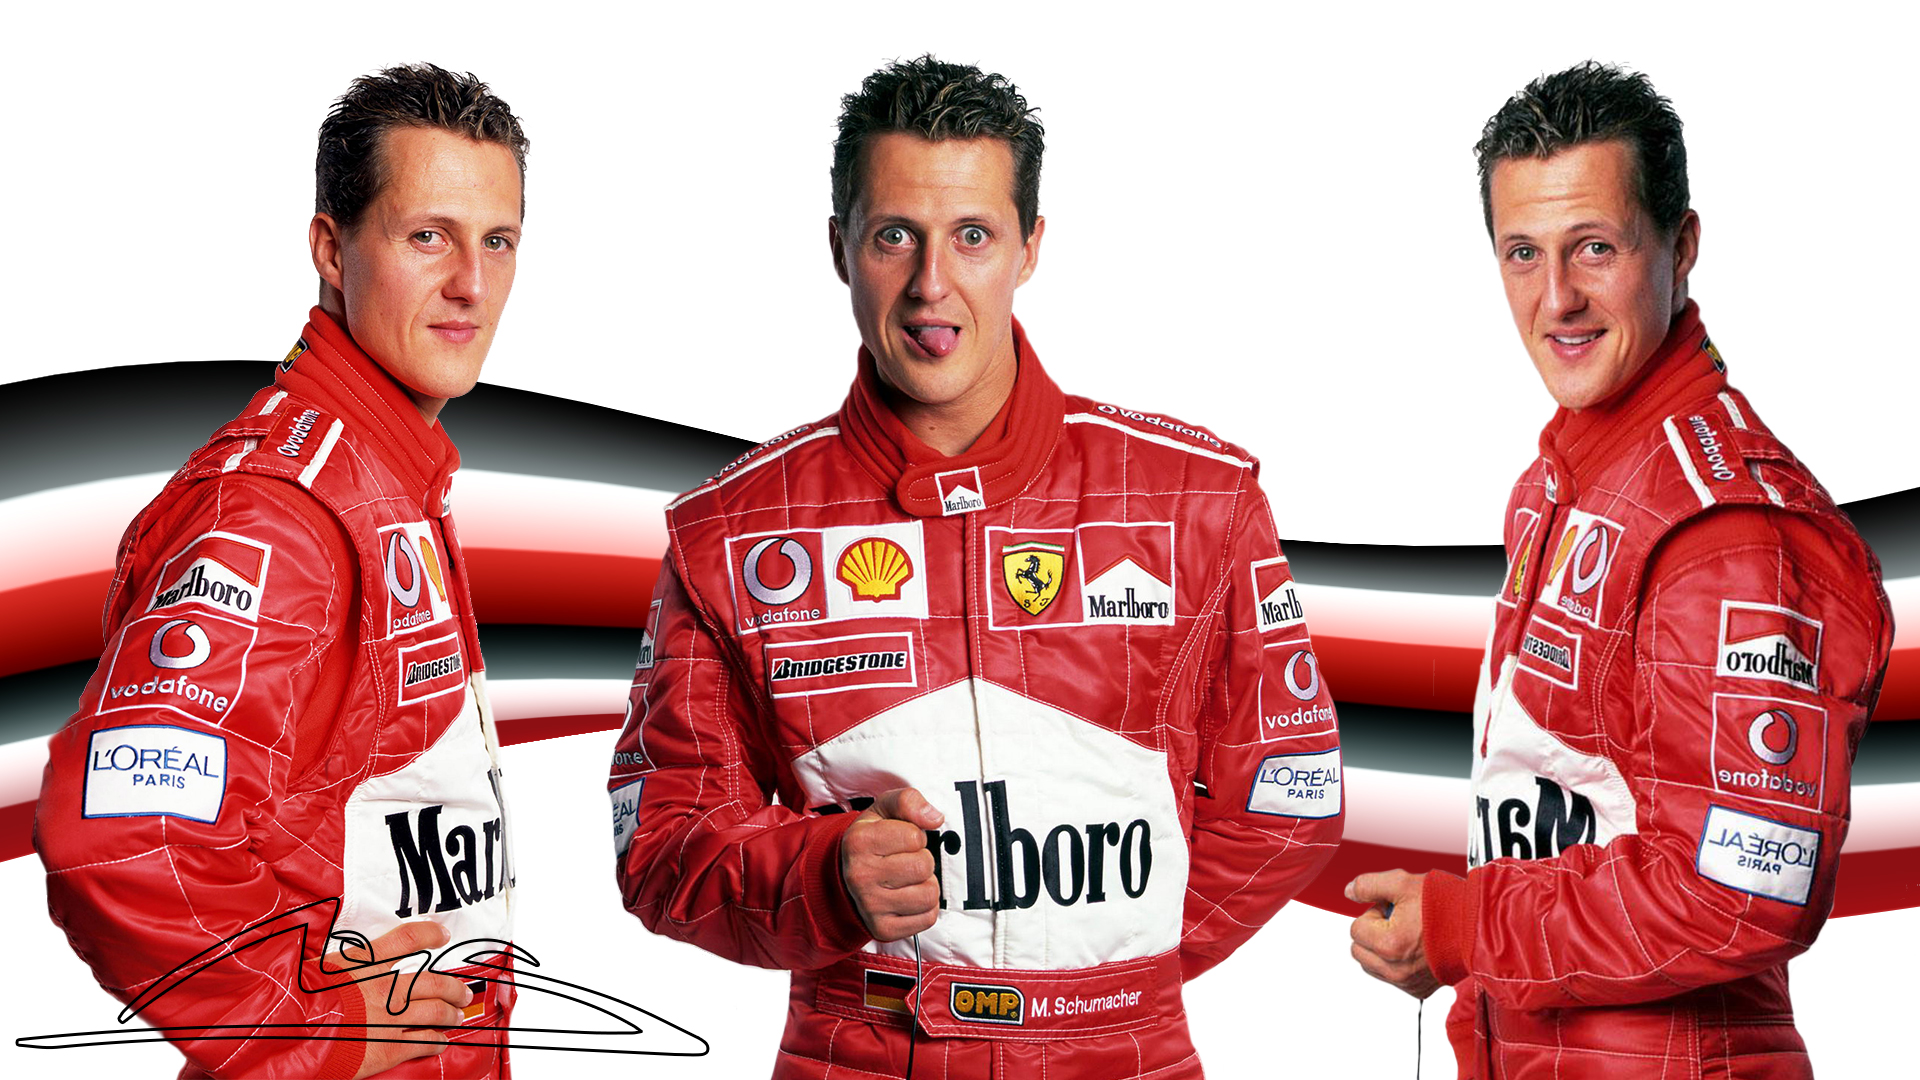 Michael Schumacher Wallpapers And Pictures | Hd Wallpapers